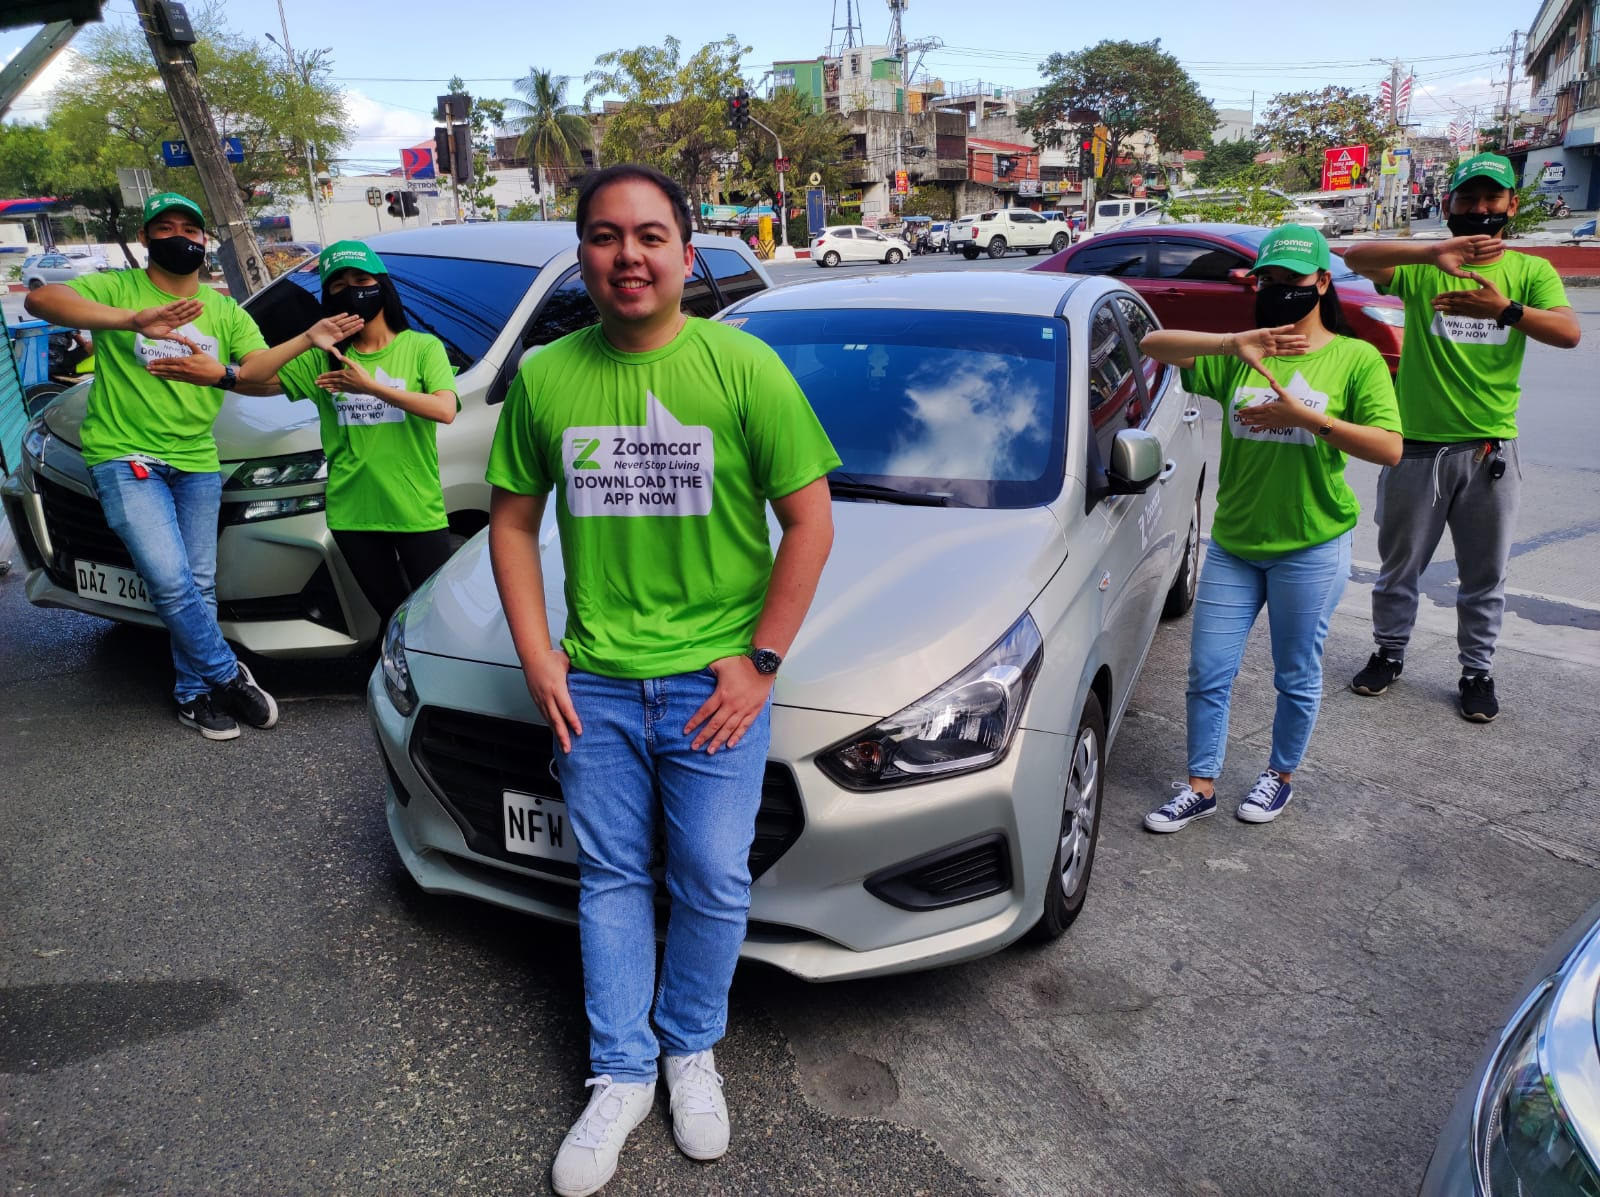 Gene Ferrer and Zoomcar PH Team • Zoomcar rental service now live in the Philippines